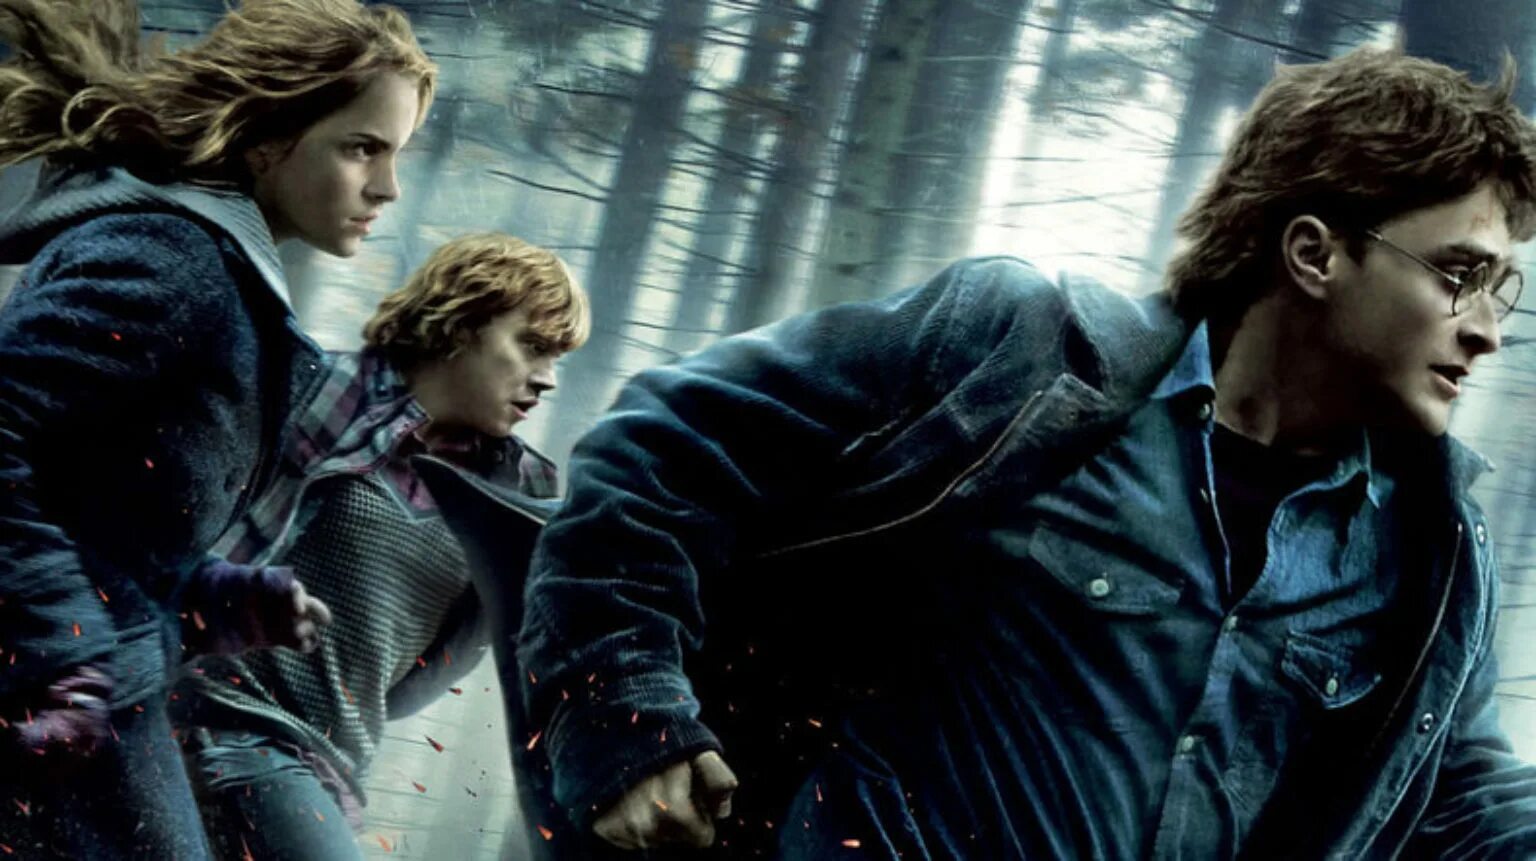 Harry Potter and the Deathly Hallows: Part 1 (2010). Аудиокниги дары смерти 1